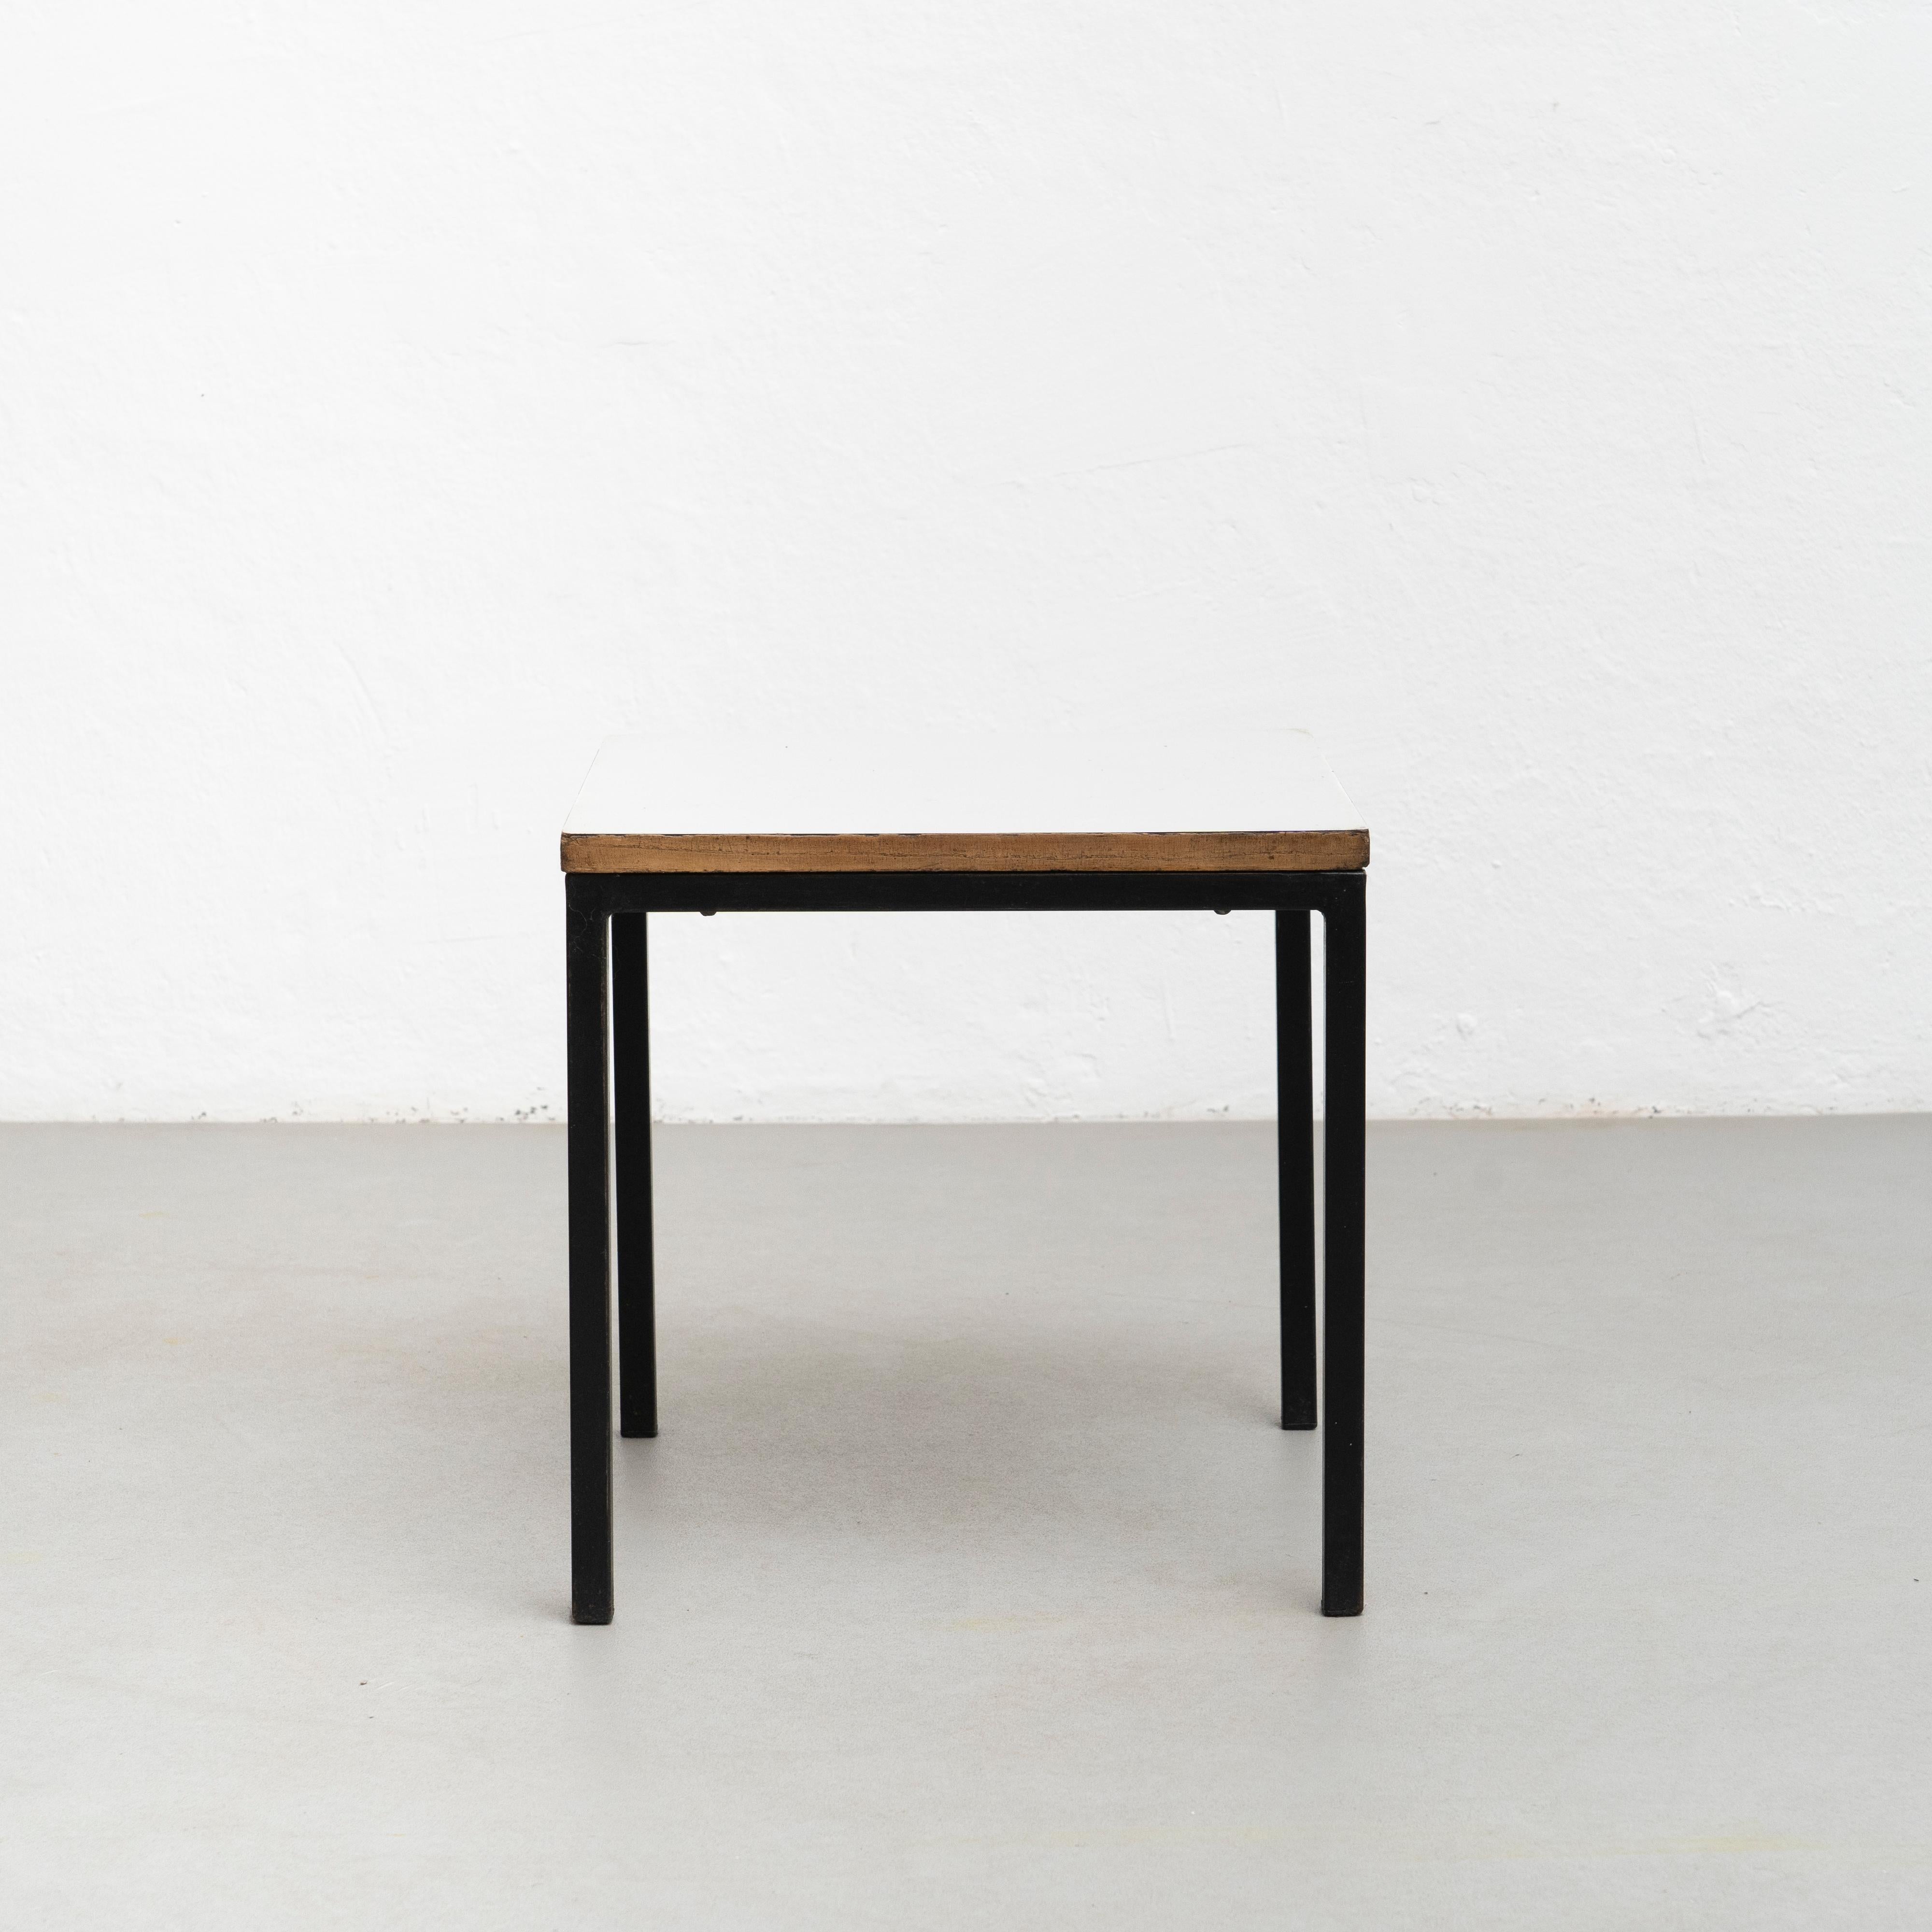 Table designed by Charlotte Perriand, circa 1950 from Cité Cansado, Mauritania, Africa. 

Painted steel, plastic laminate-covered wood.

Measures: 74.3 x 80 x 80 cm

In good original condition, with minor wear consistent with age and use,